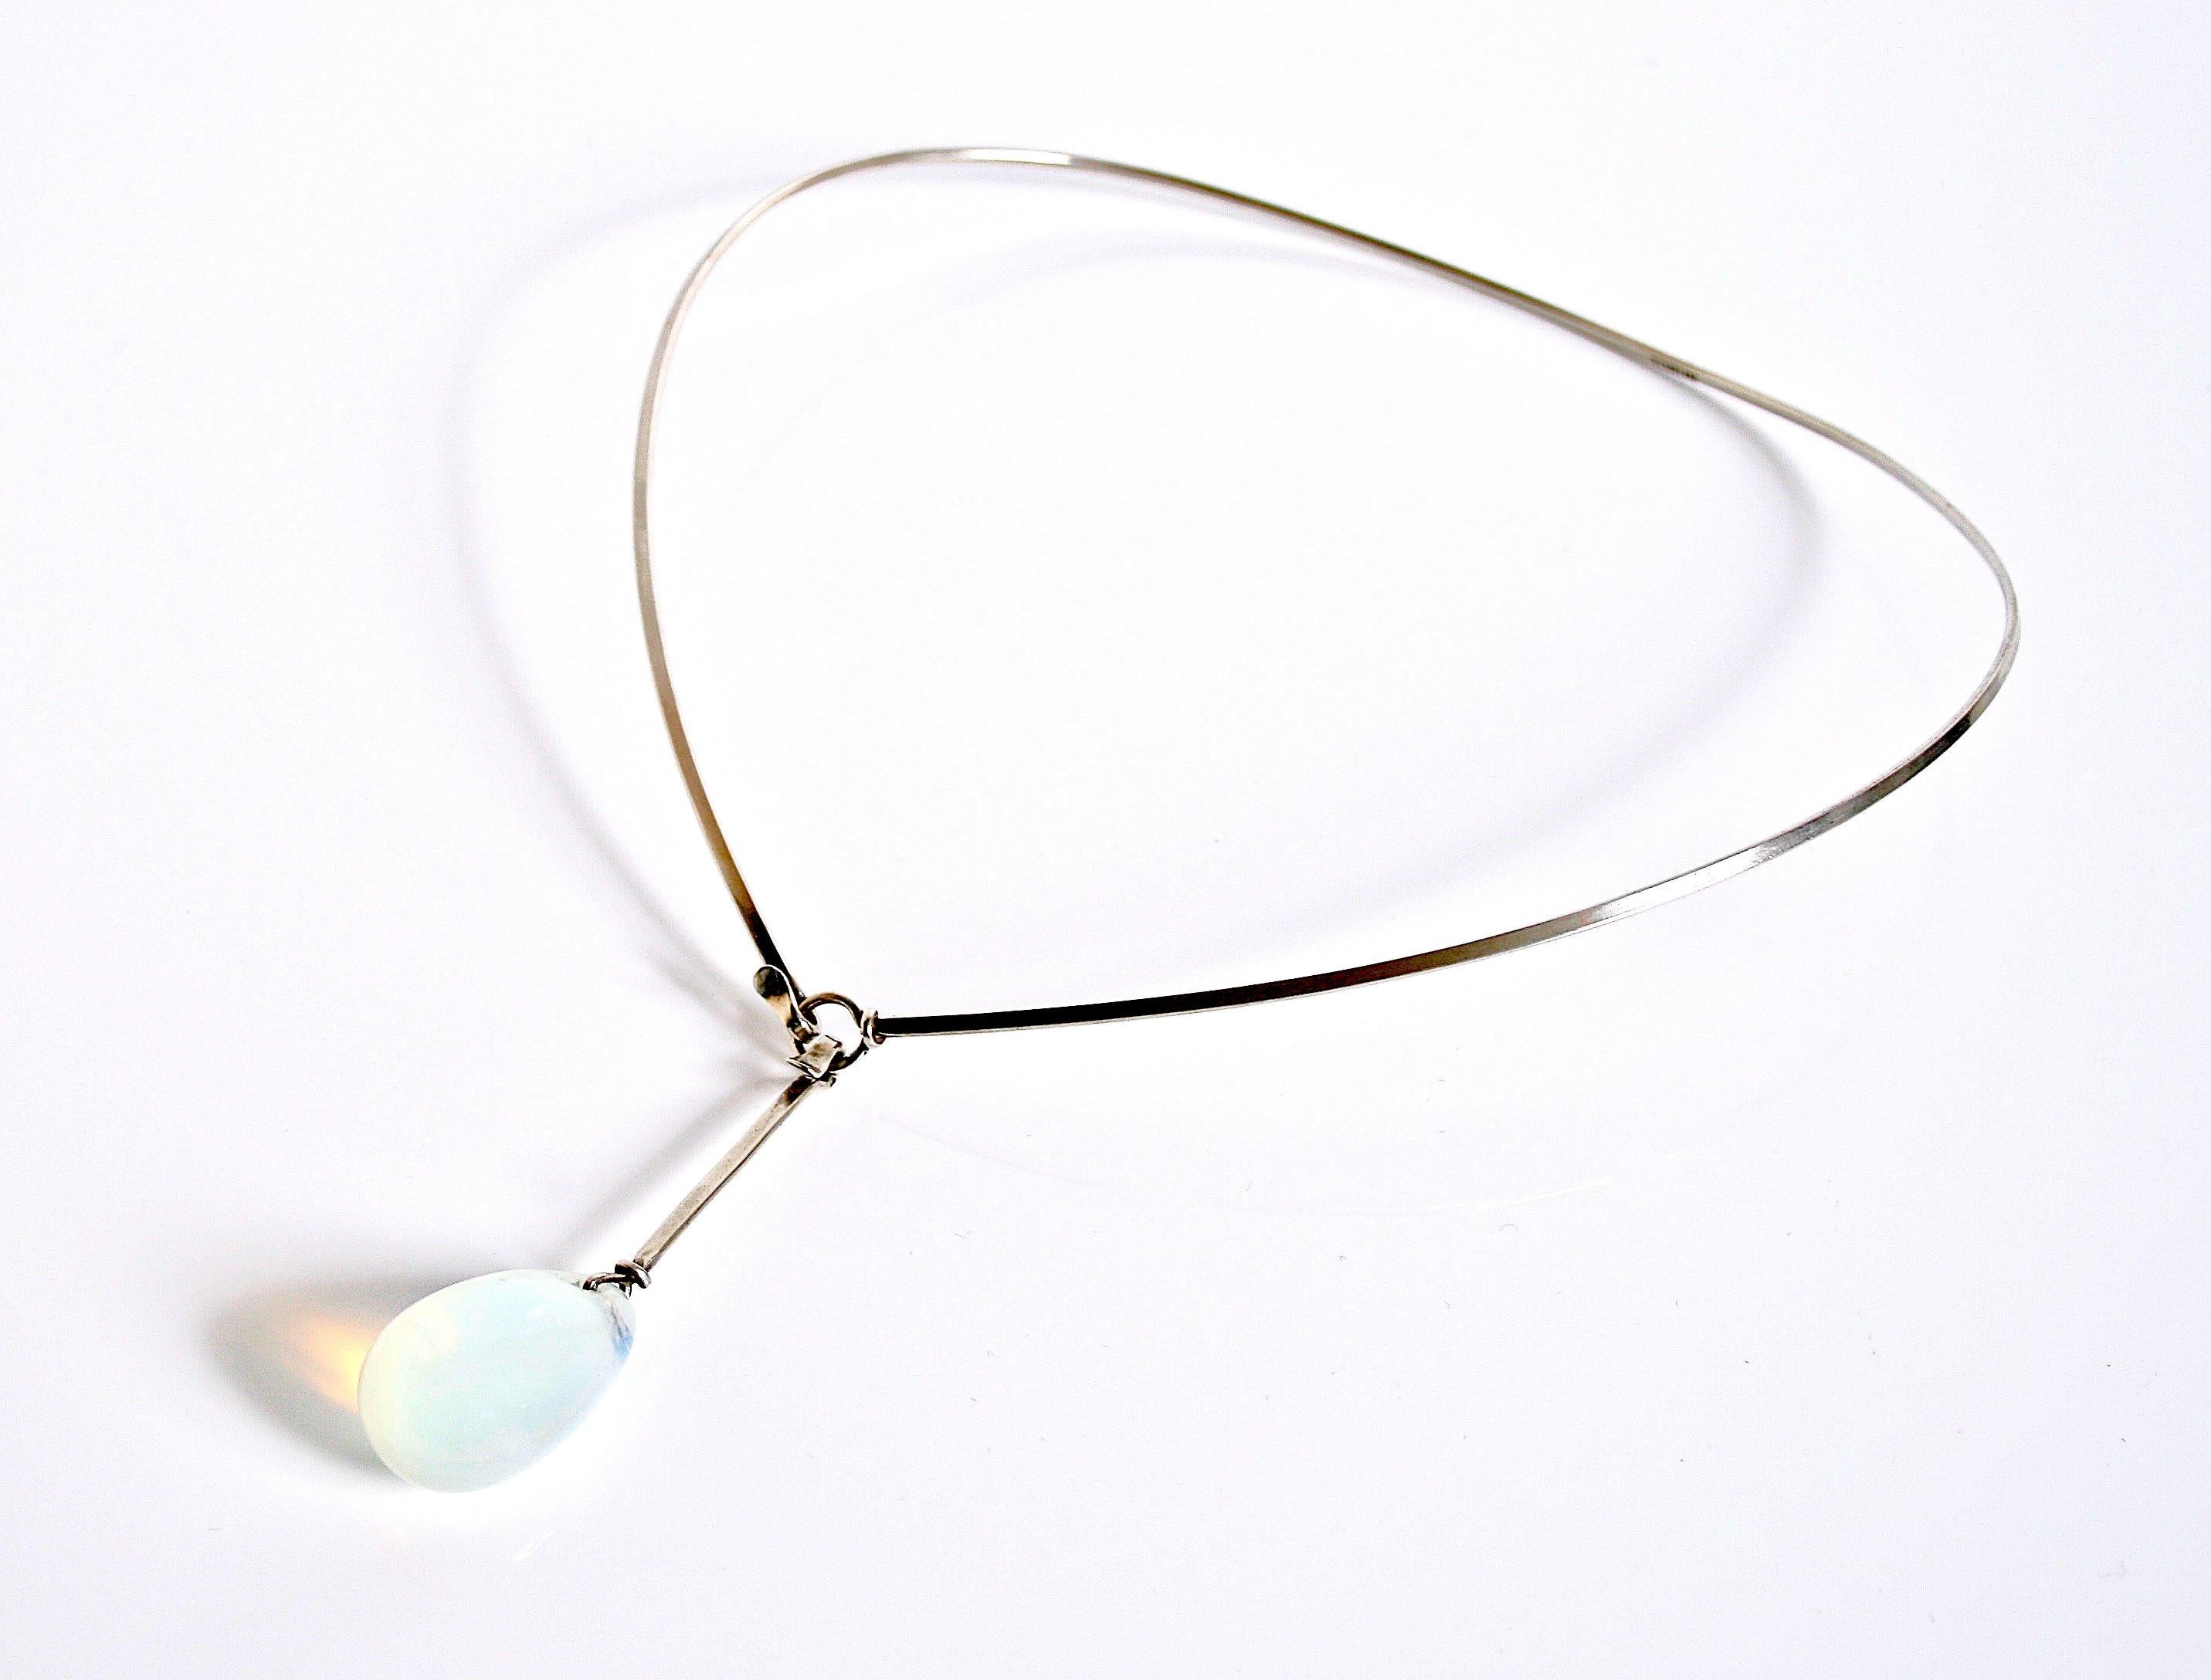 Early Vivianna Torun Bulow-Hube sterling silver & glass drop neckring made in her own workshop in Biot France. Very rare item marked Torun with French hallmarks. The drop is a spectacular colour milky blue/white looks like moonstone. Her early work